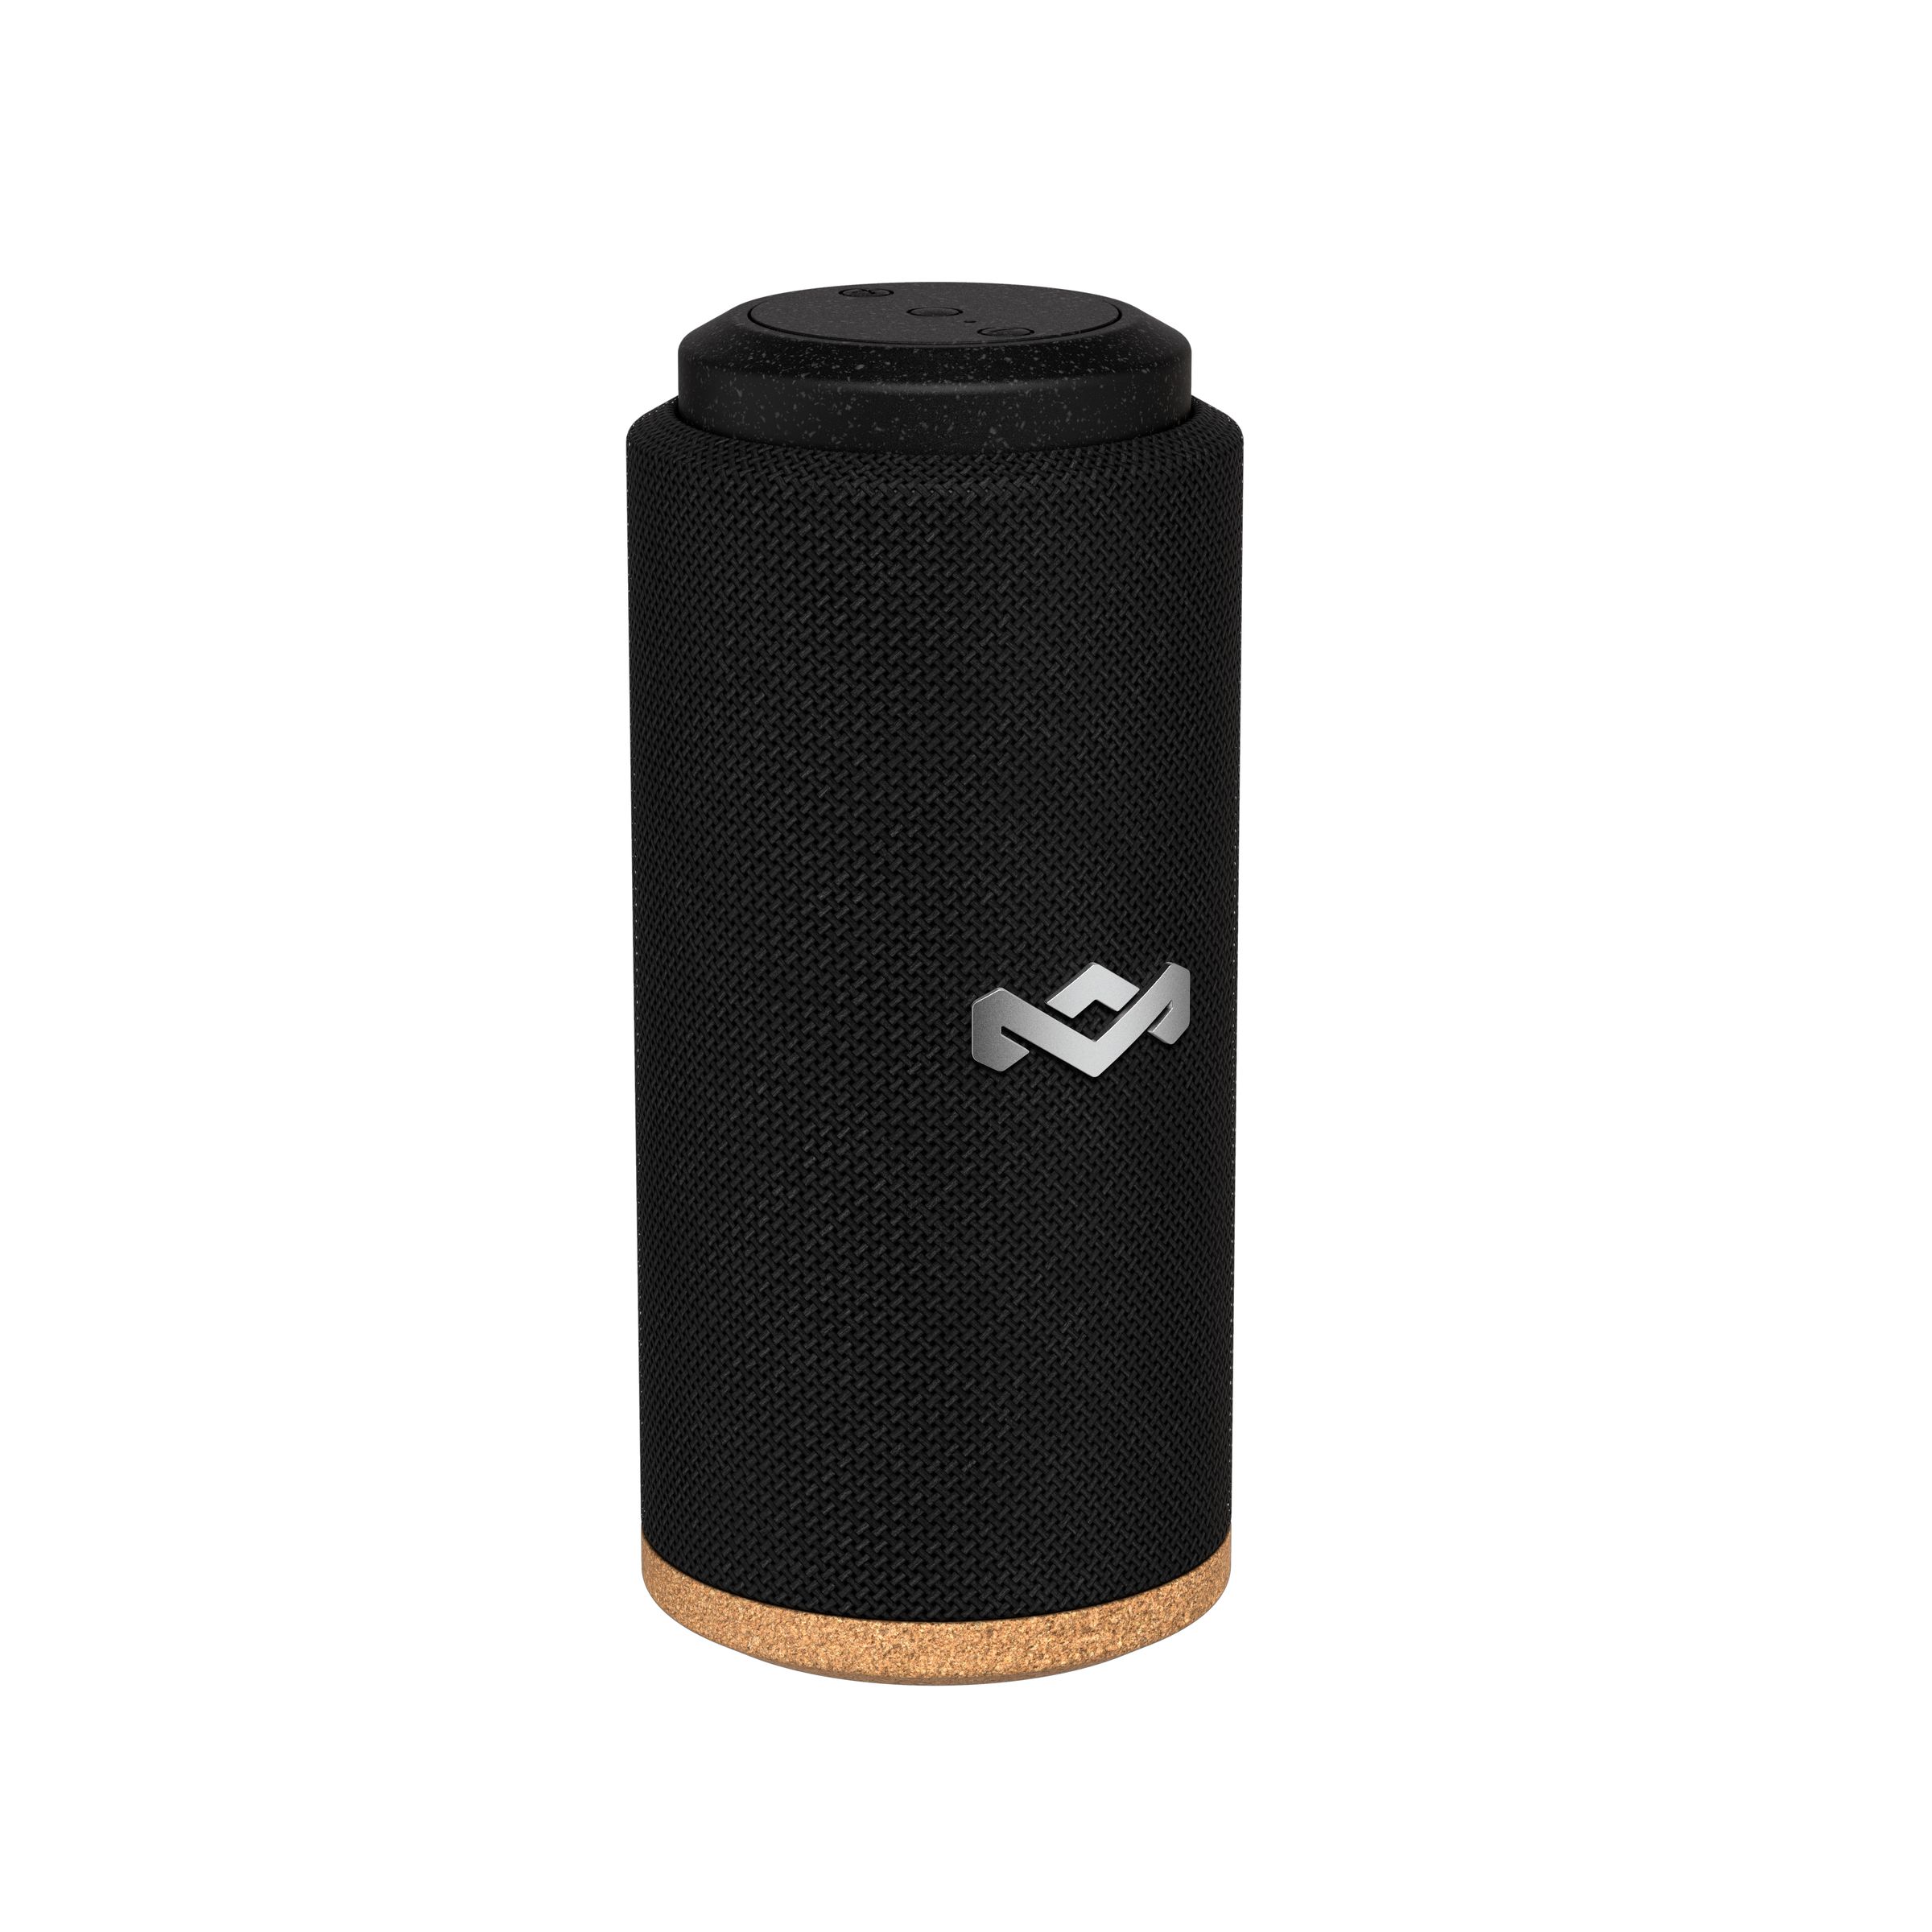 House of Marley’s No Bounds Sports speaker in black.